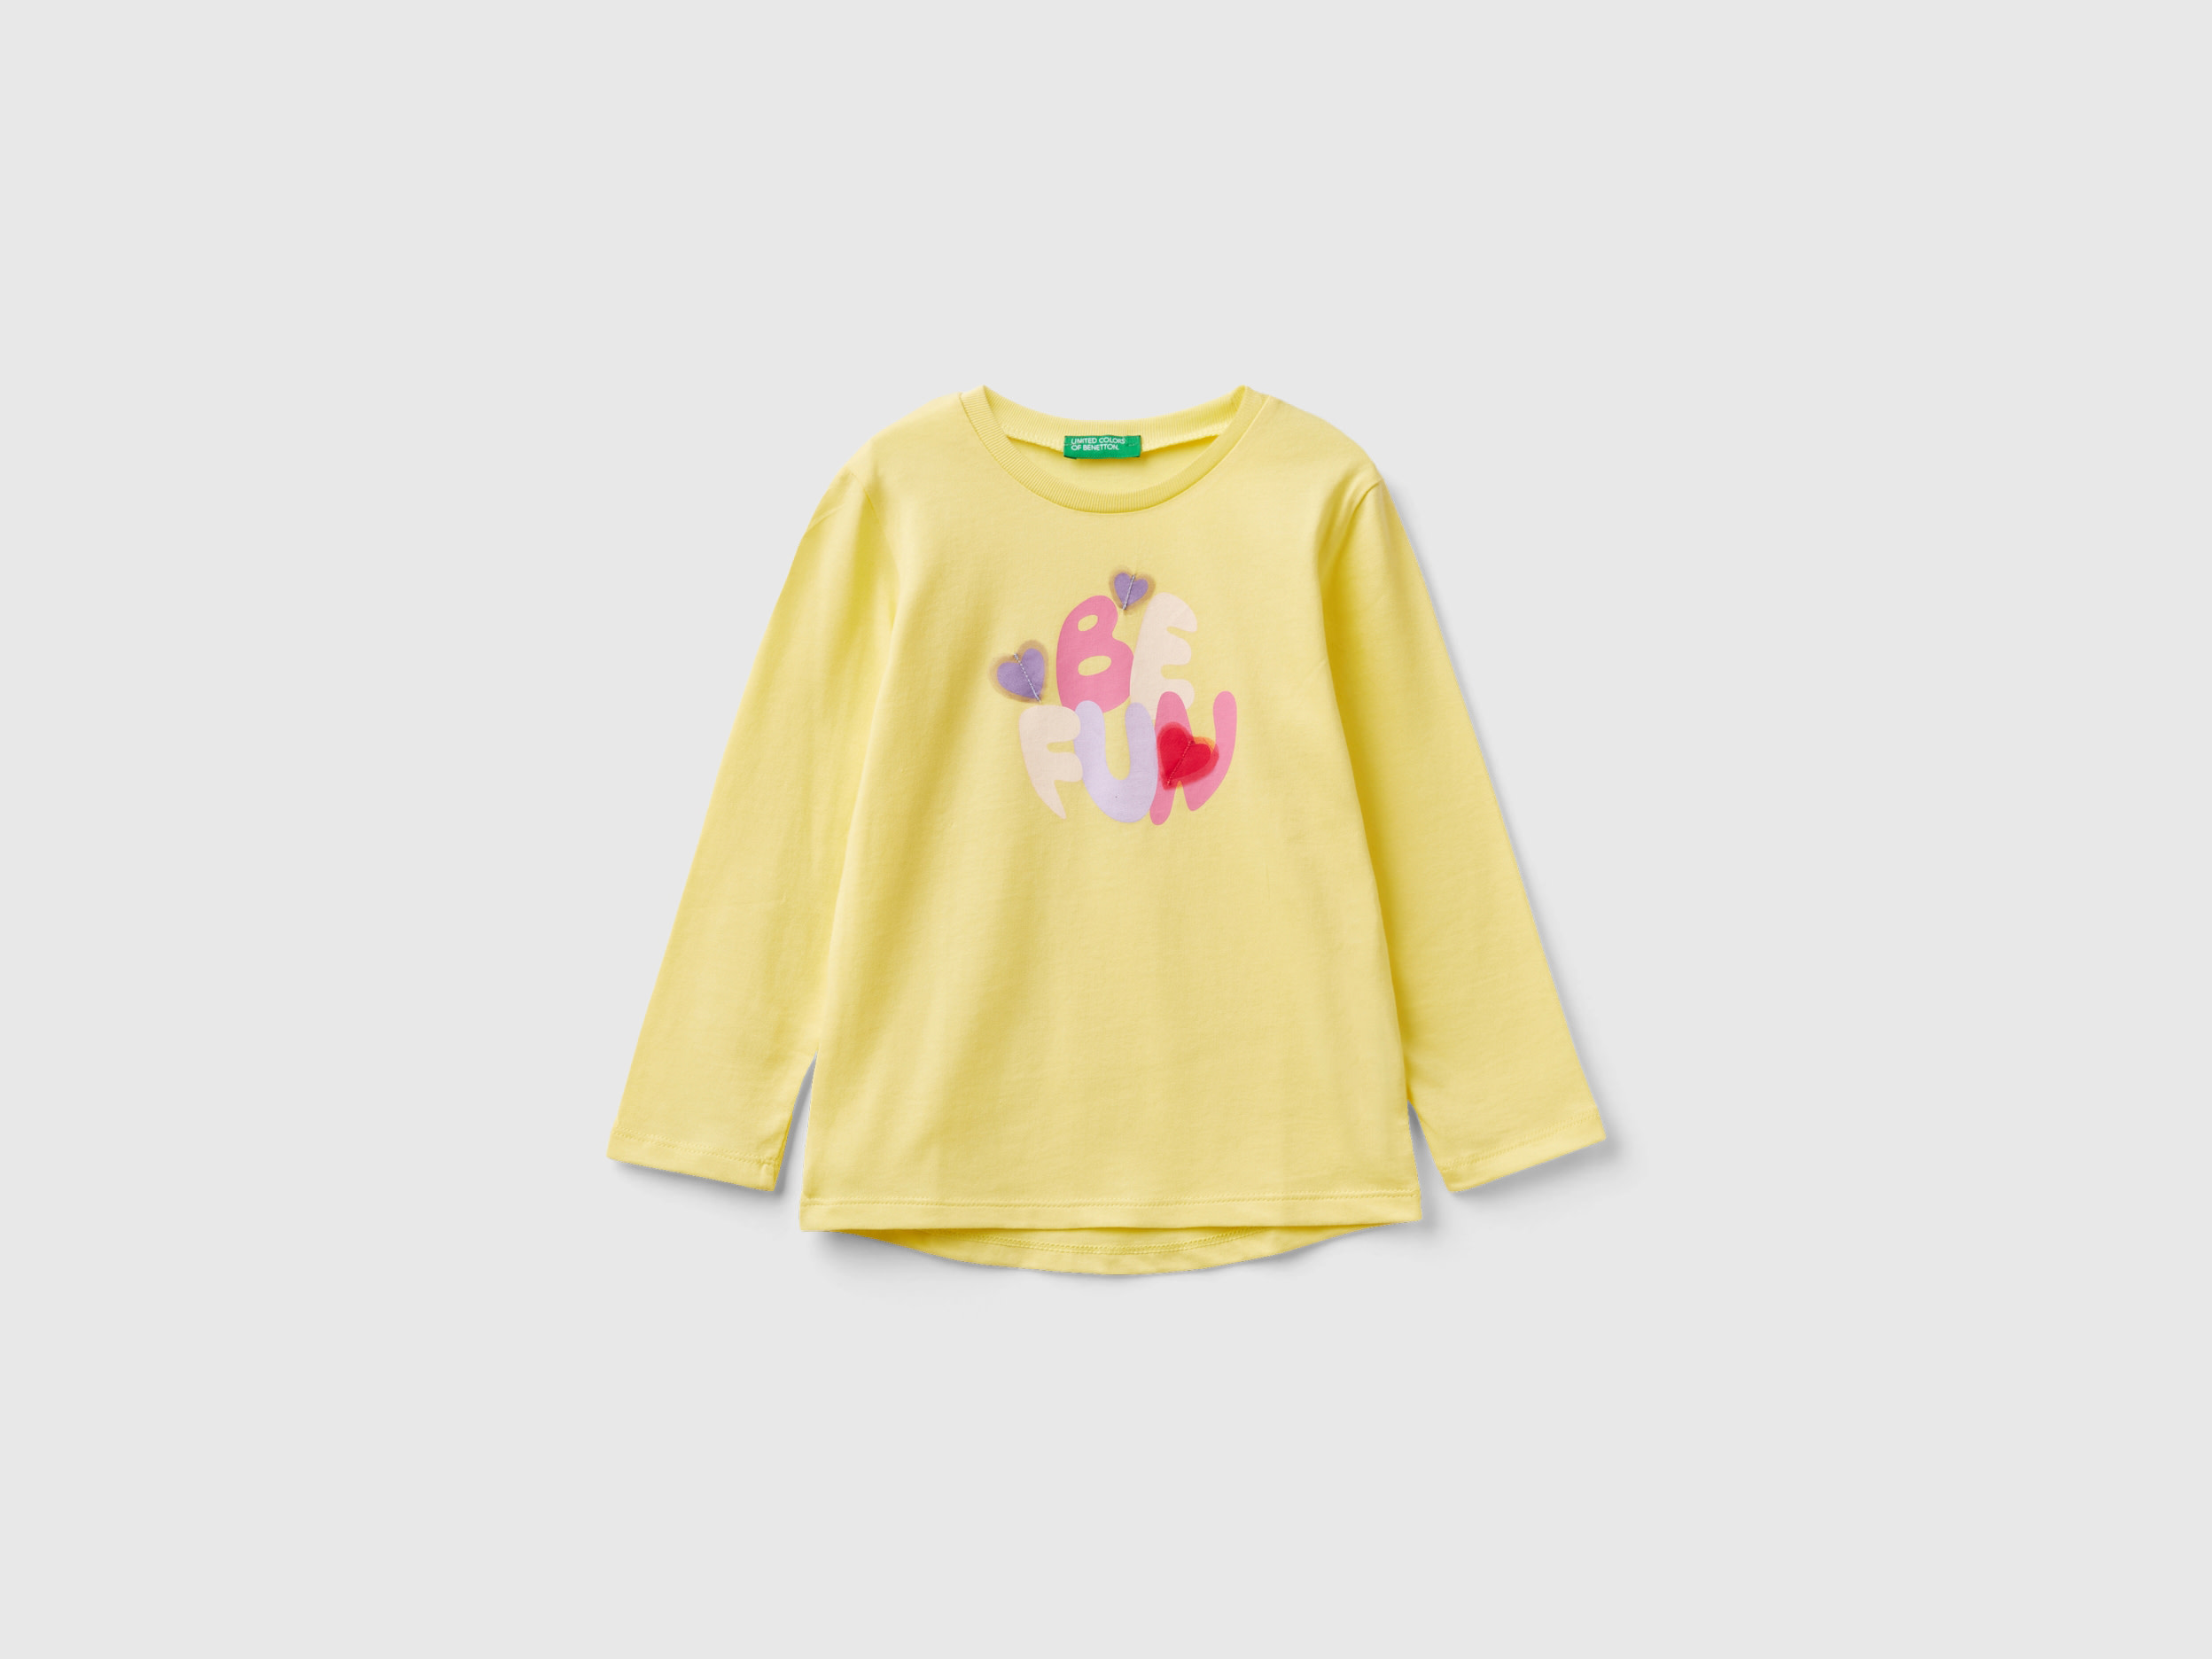 Benetton, Long Sleeve T-shirt With Print, size 2-3, Yellow, Kids